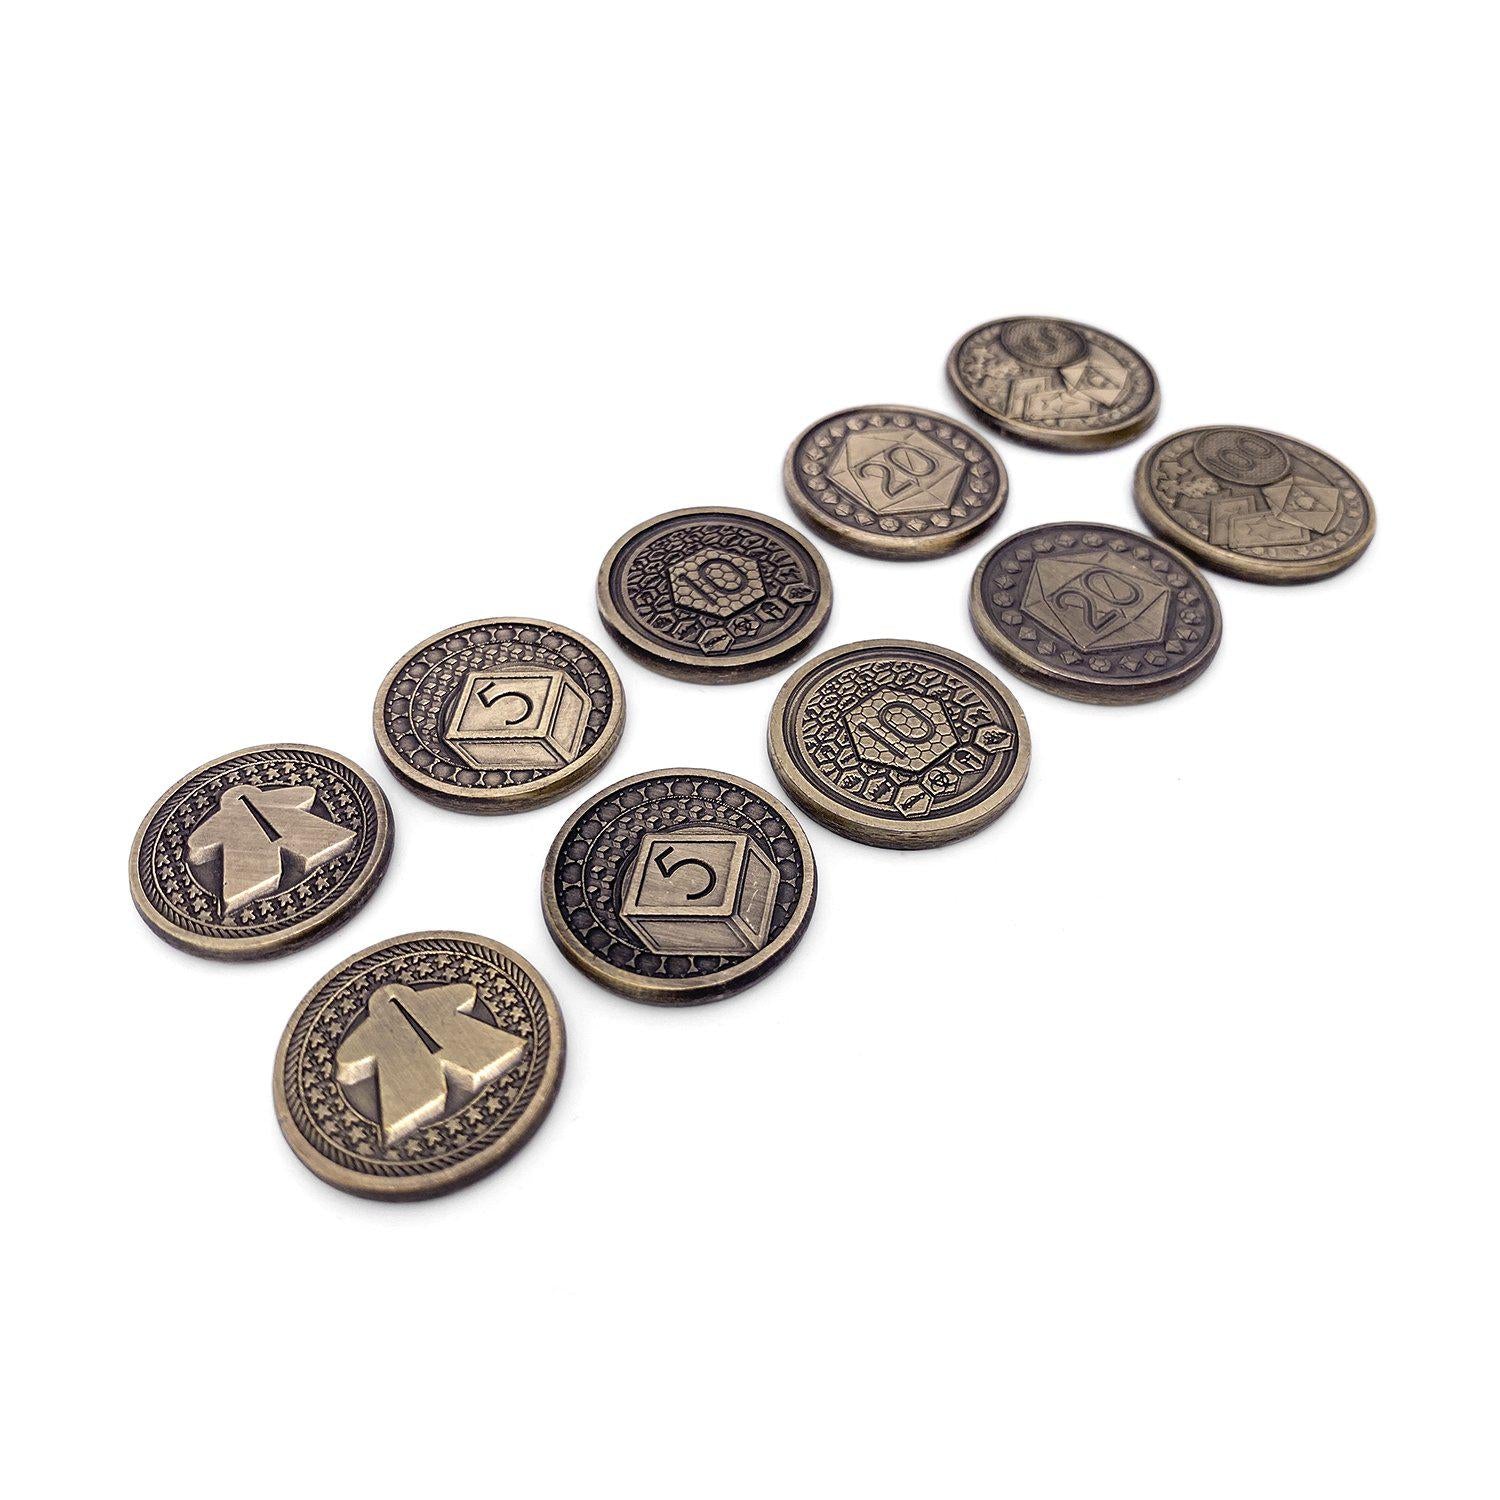 Adventure Coins - Game Night Metal Coins Set of 10